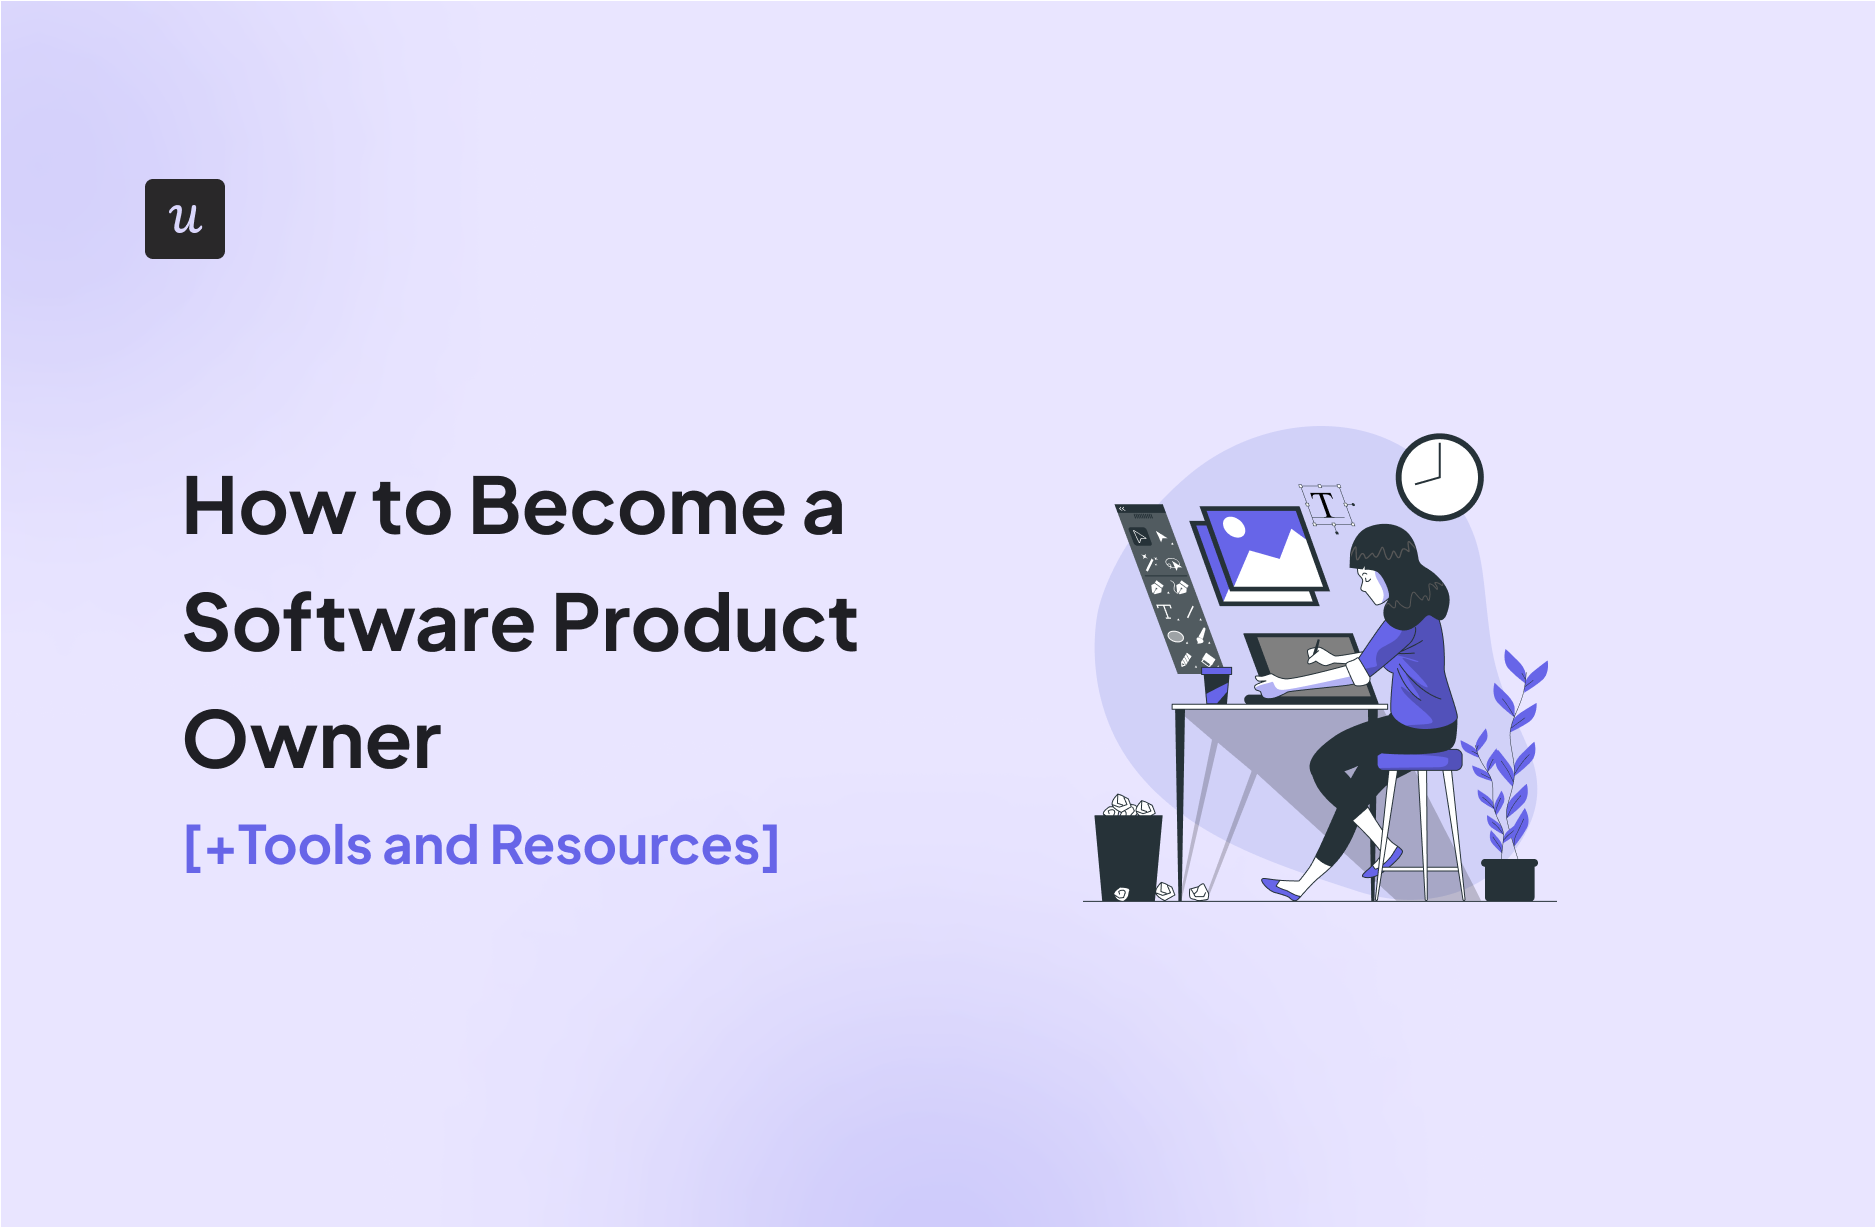 How to Become a Software Product Owner [+Tools and Resources]